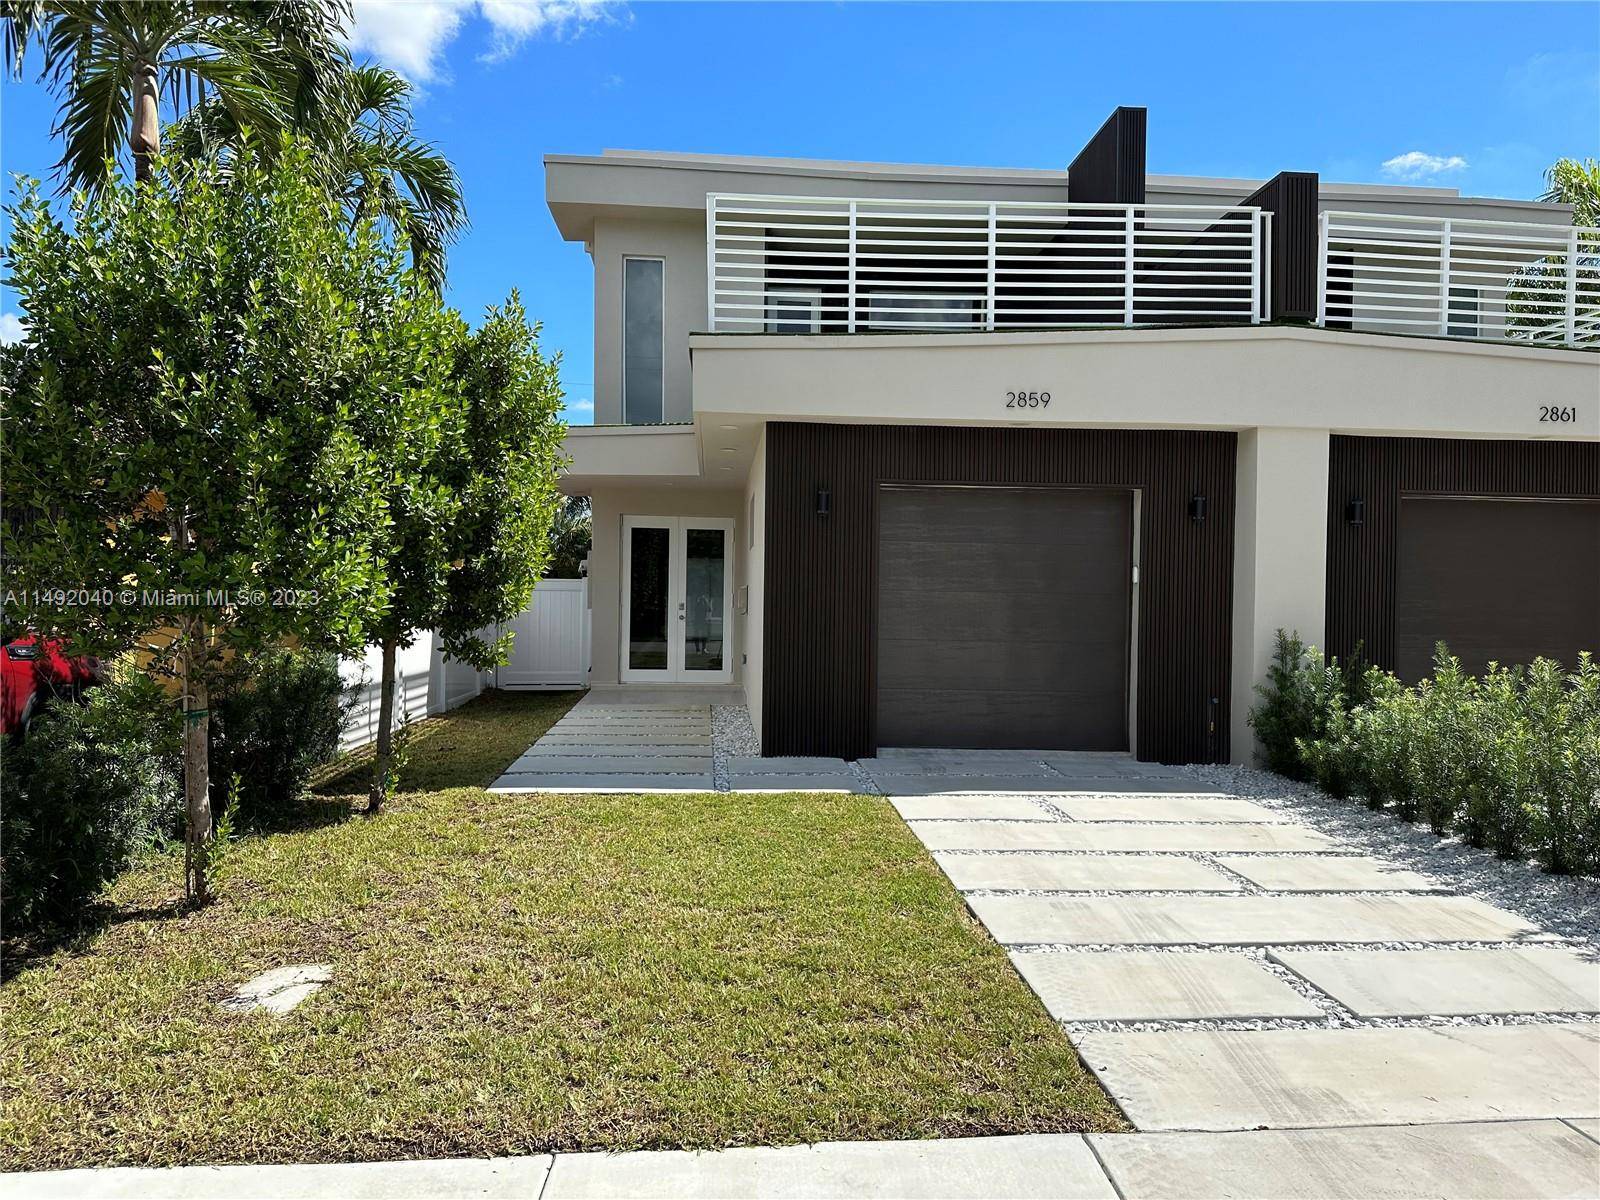 Brand new Construction ! Be the first to move into this beautiful townhome in the heart of Miami.